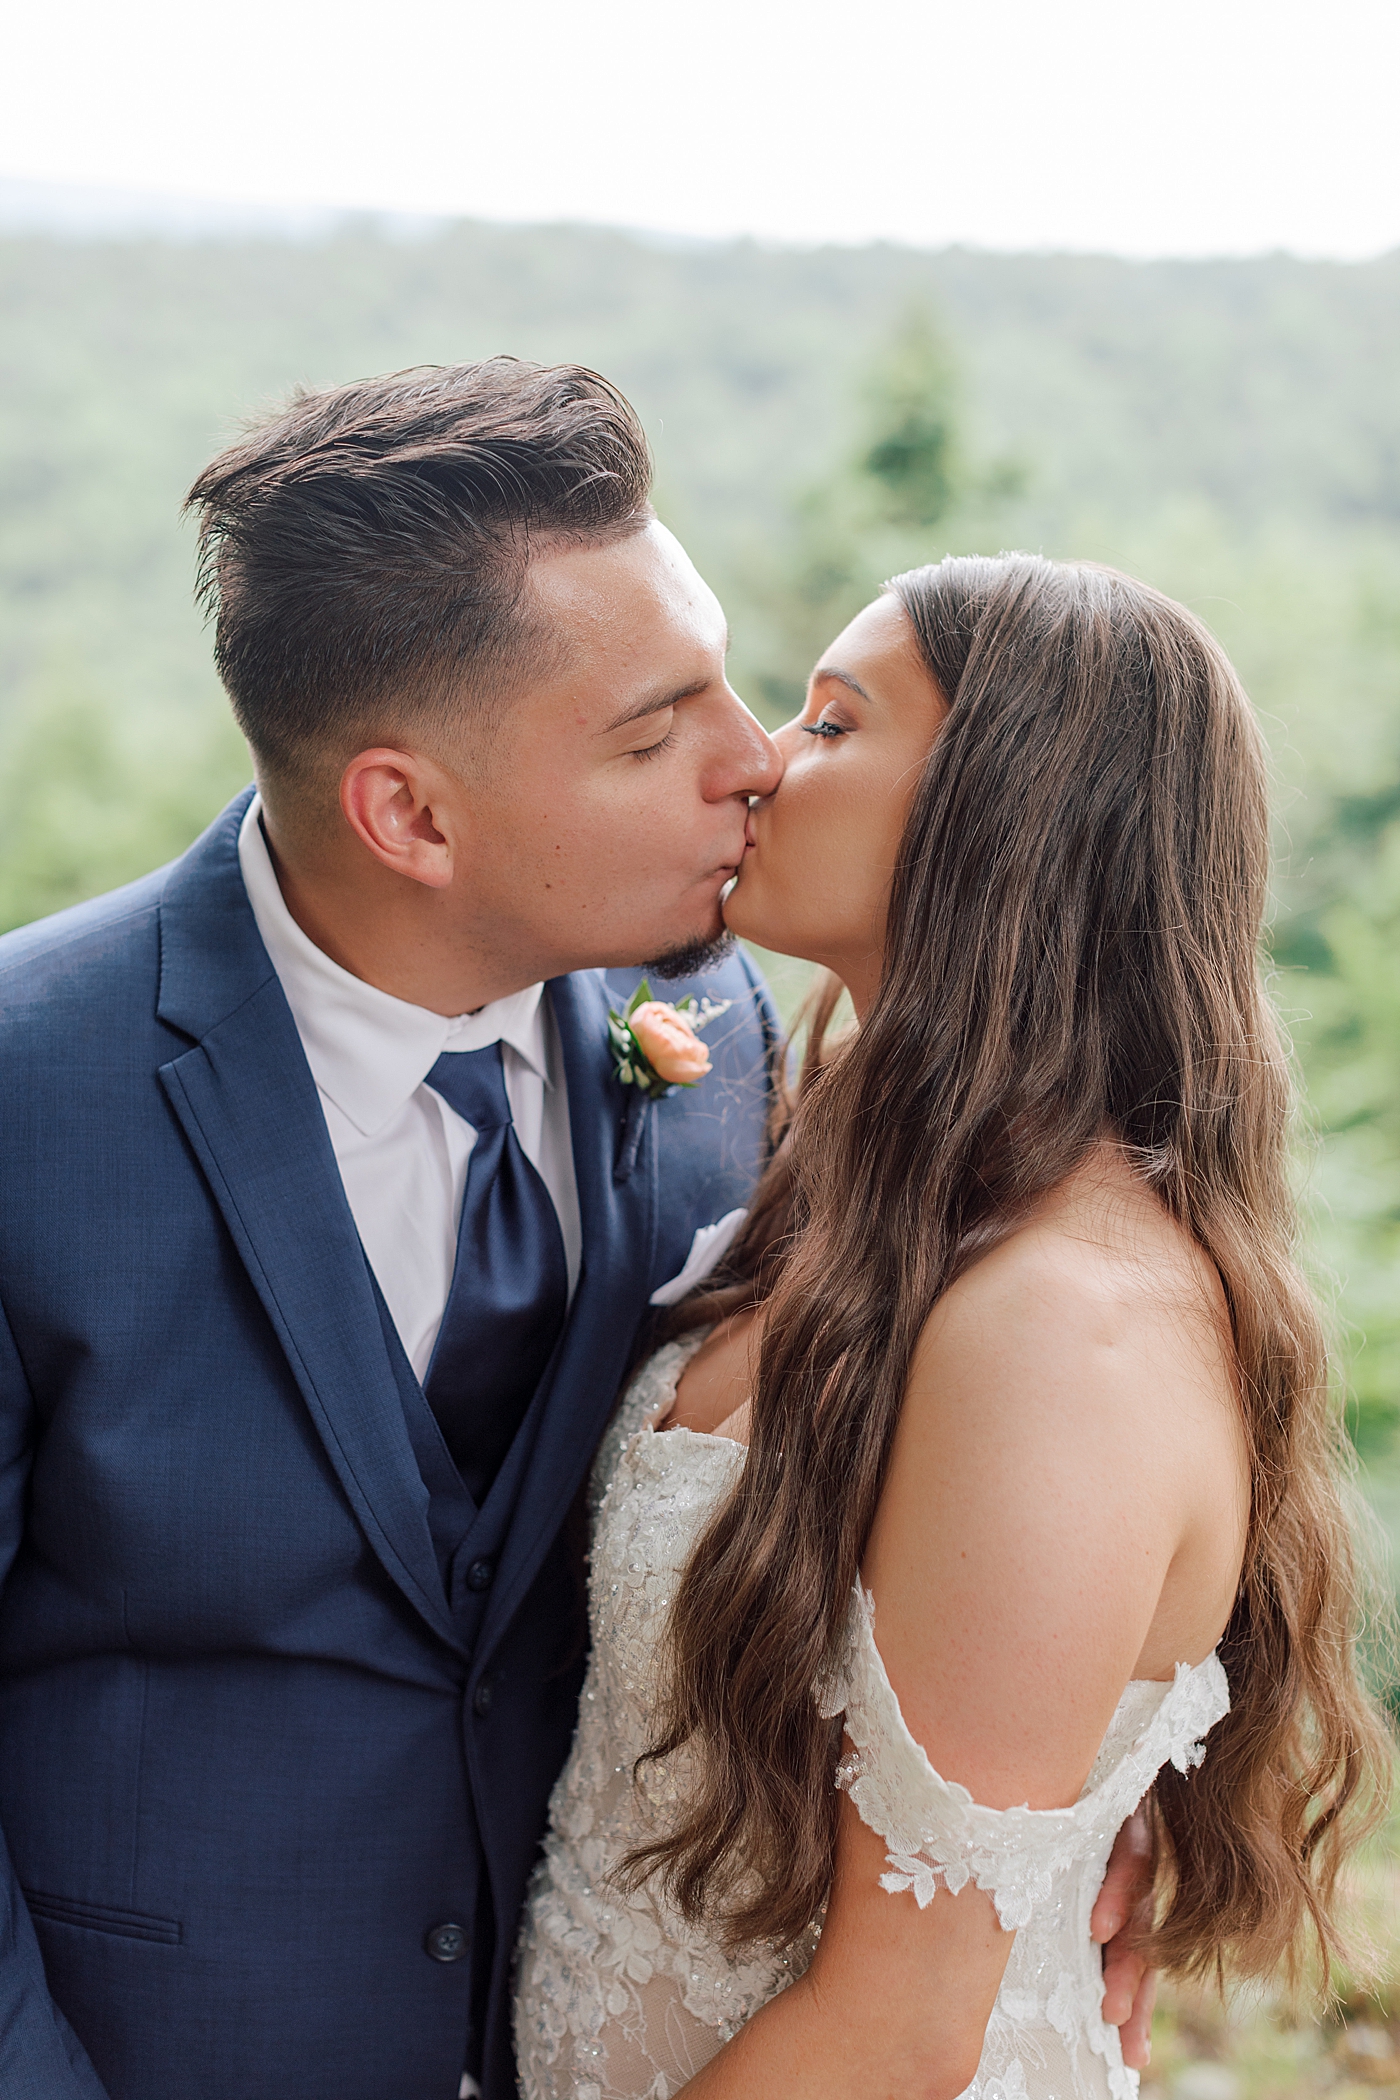 Bride and groom kiss with mountains in the background | Image by Hope Helmuth Photography 